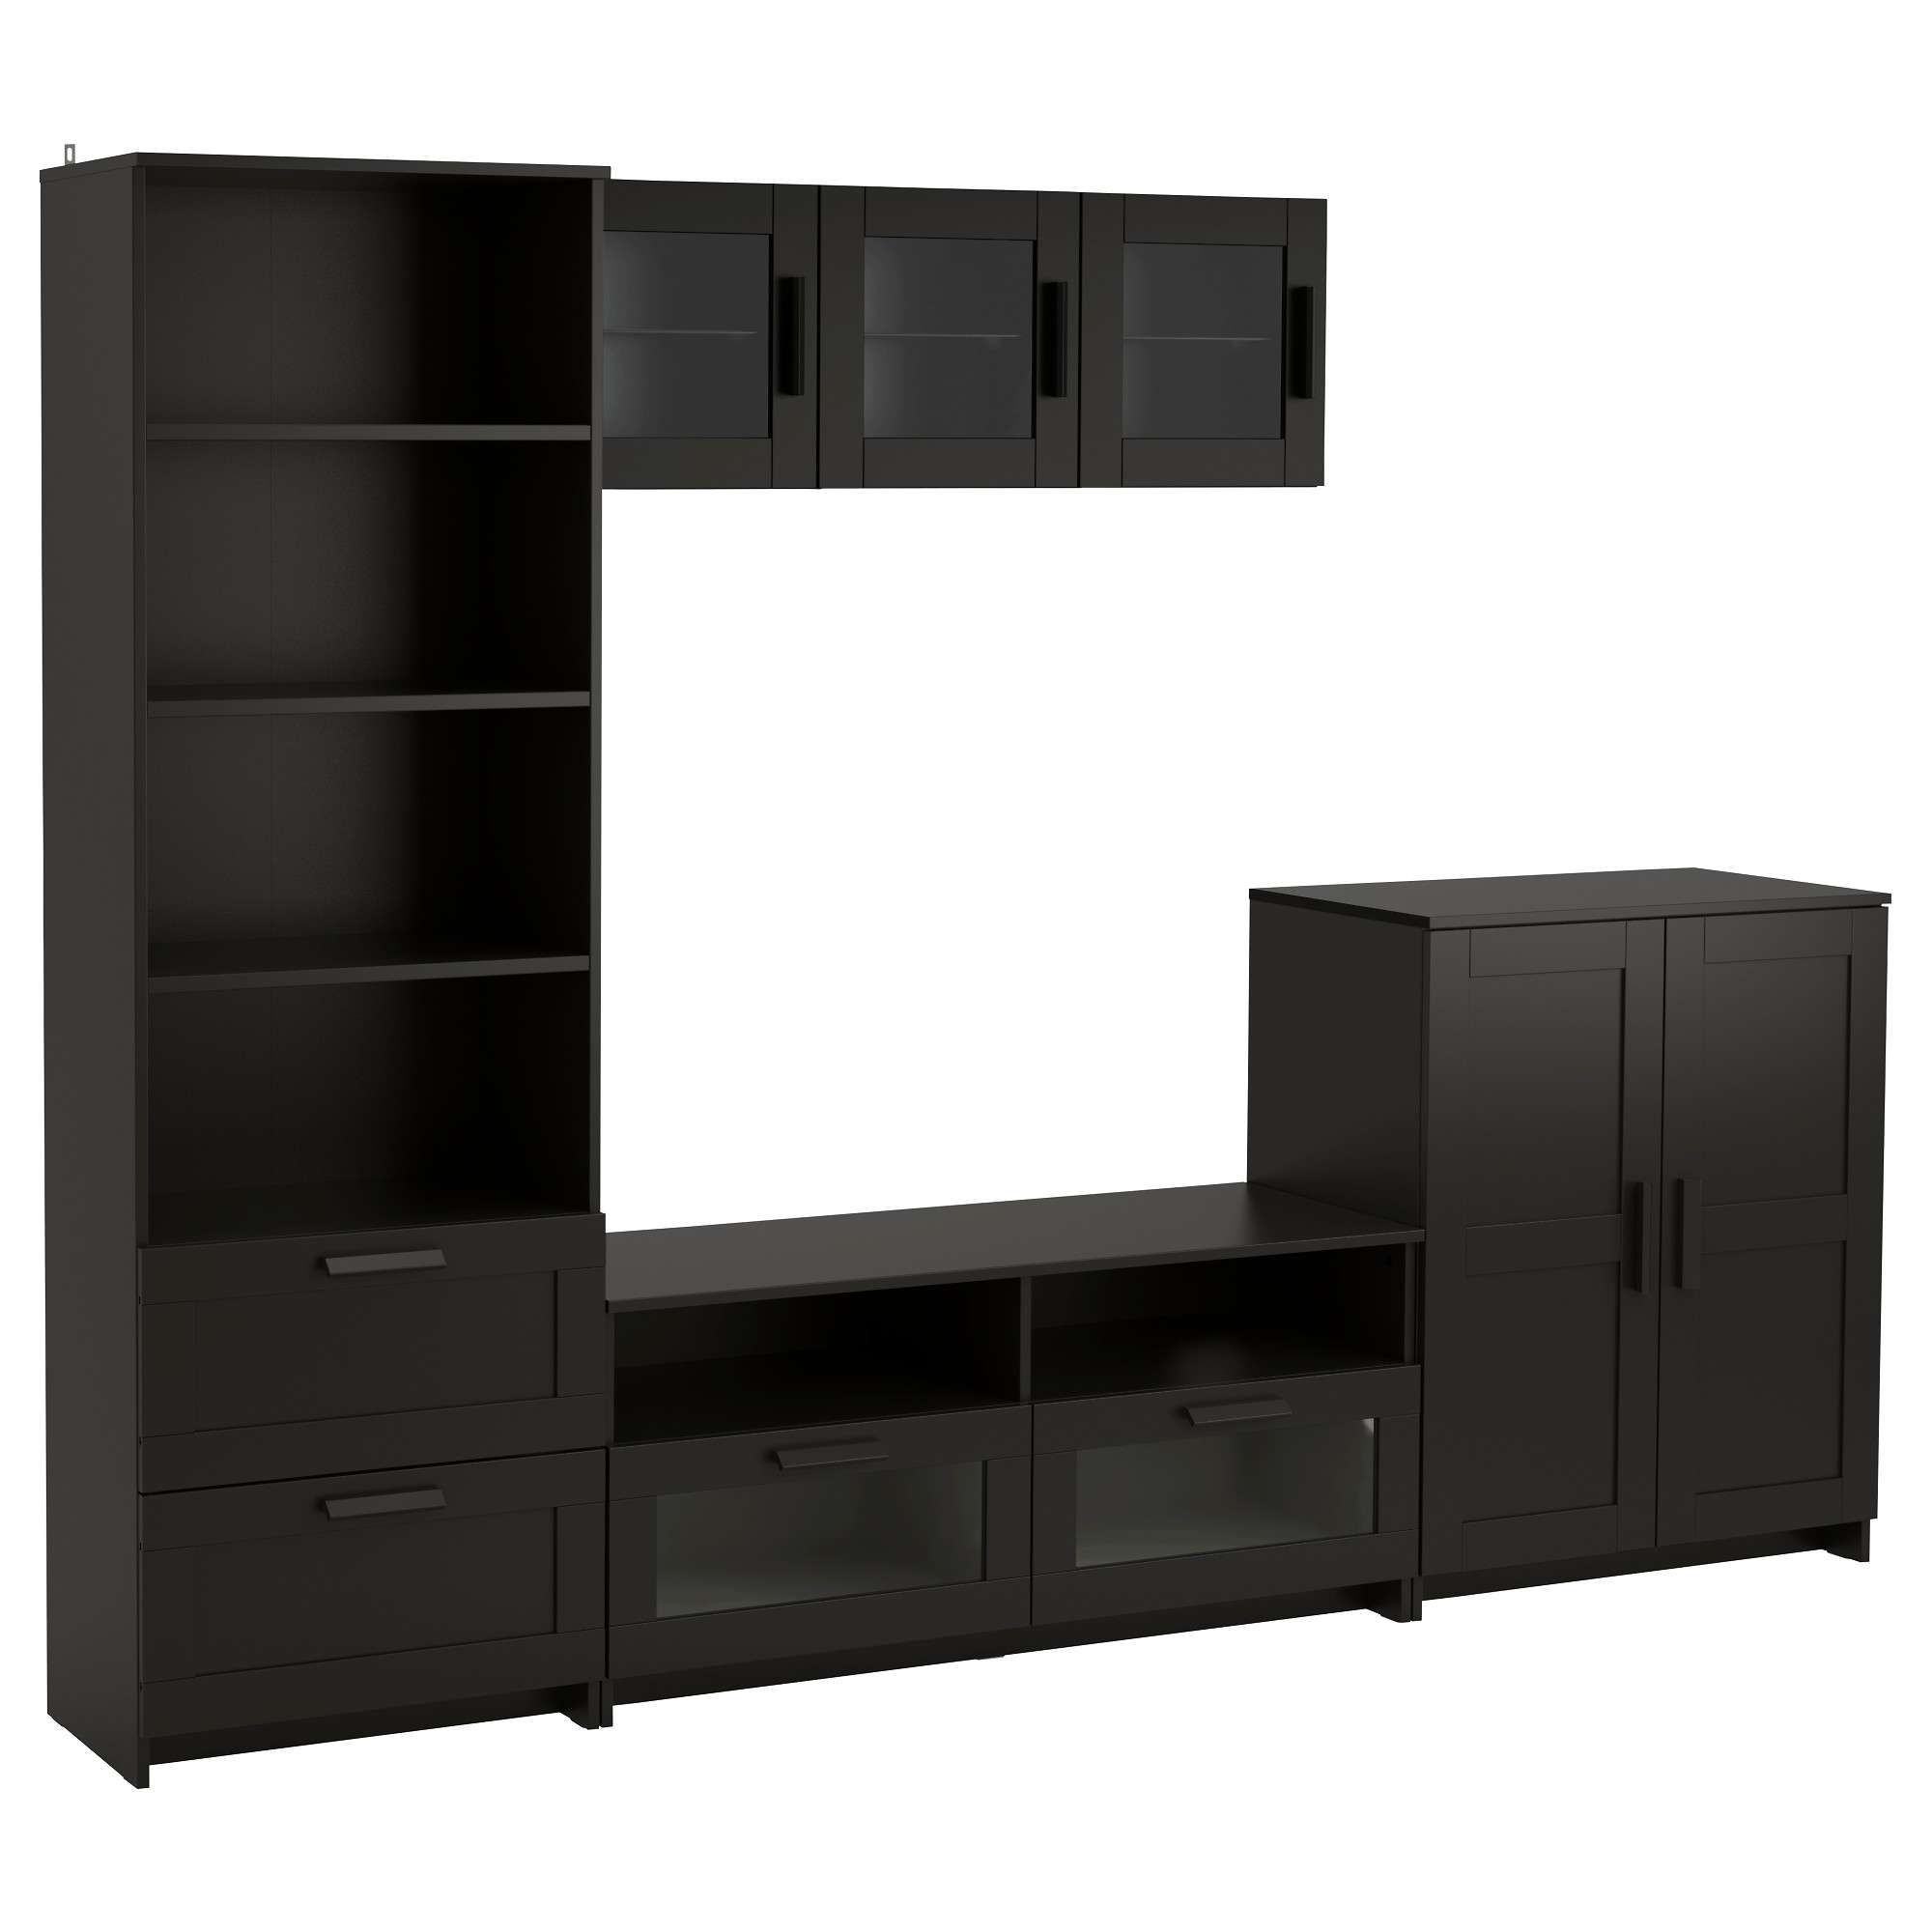 Tv Stands & Entertainment Centers – Ikea With Wall Mounted Tv Cabinets Ikea (View 1 of 20)